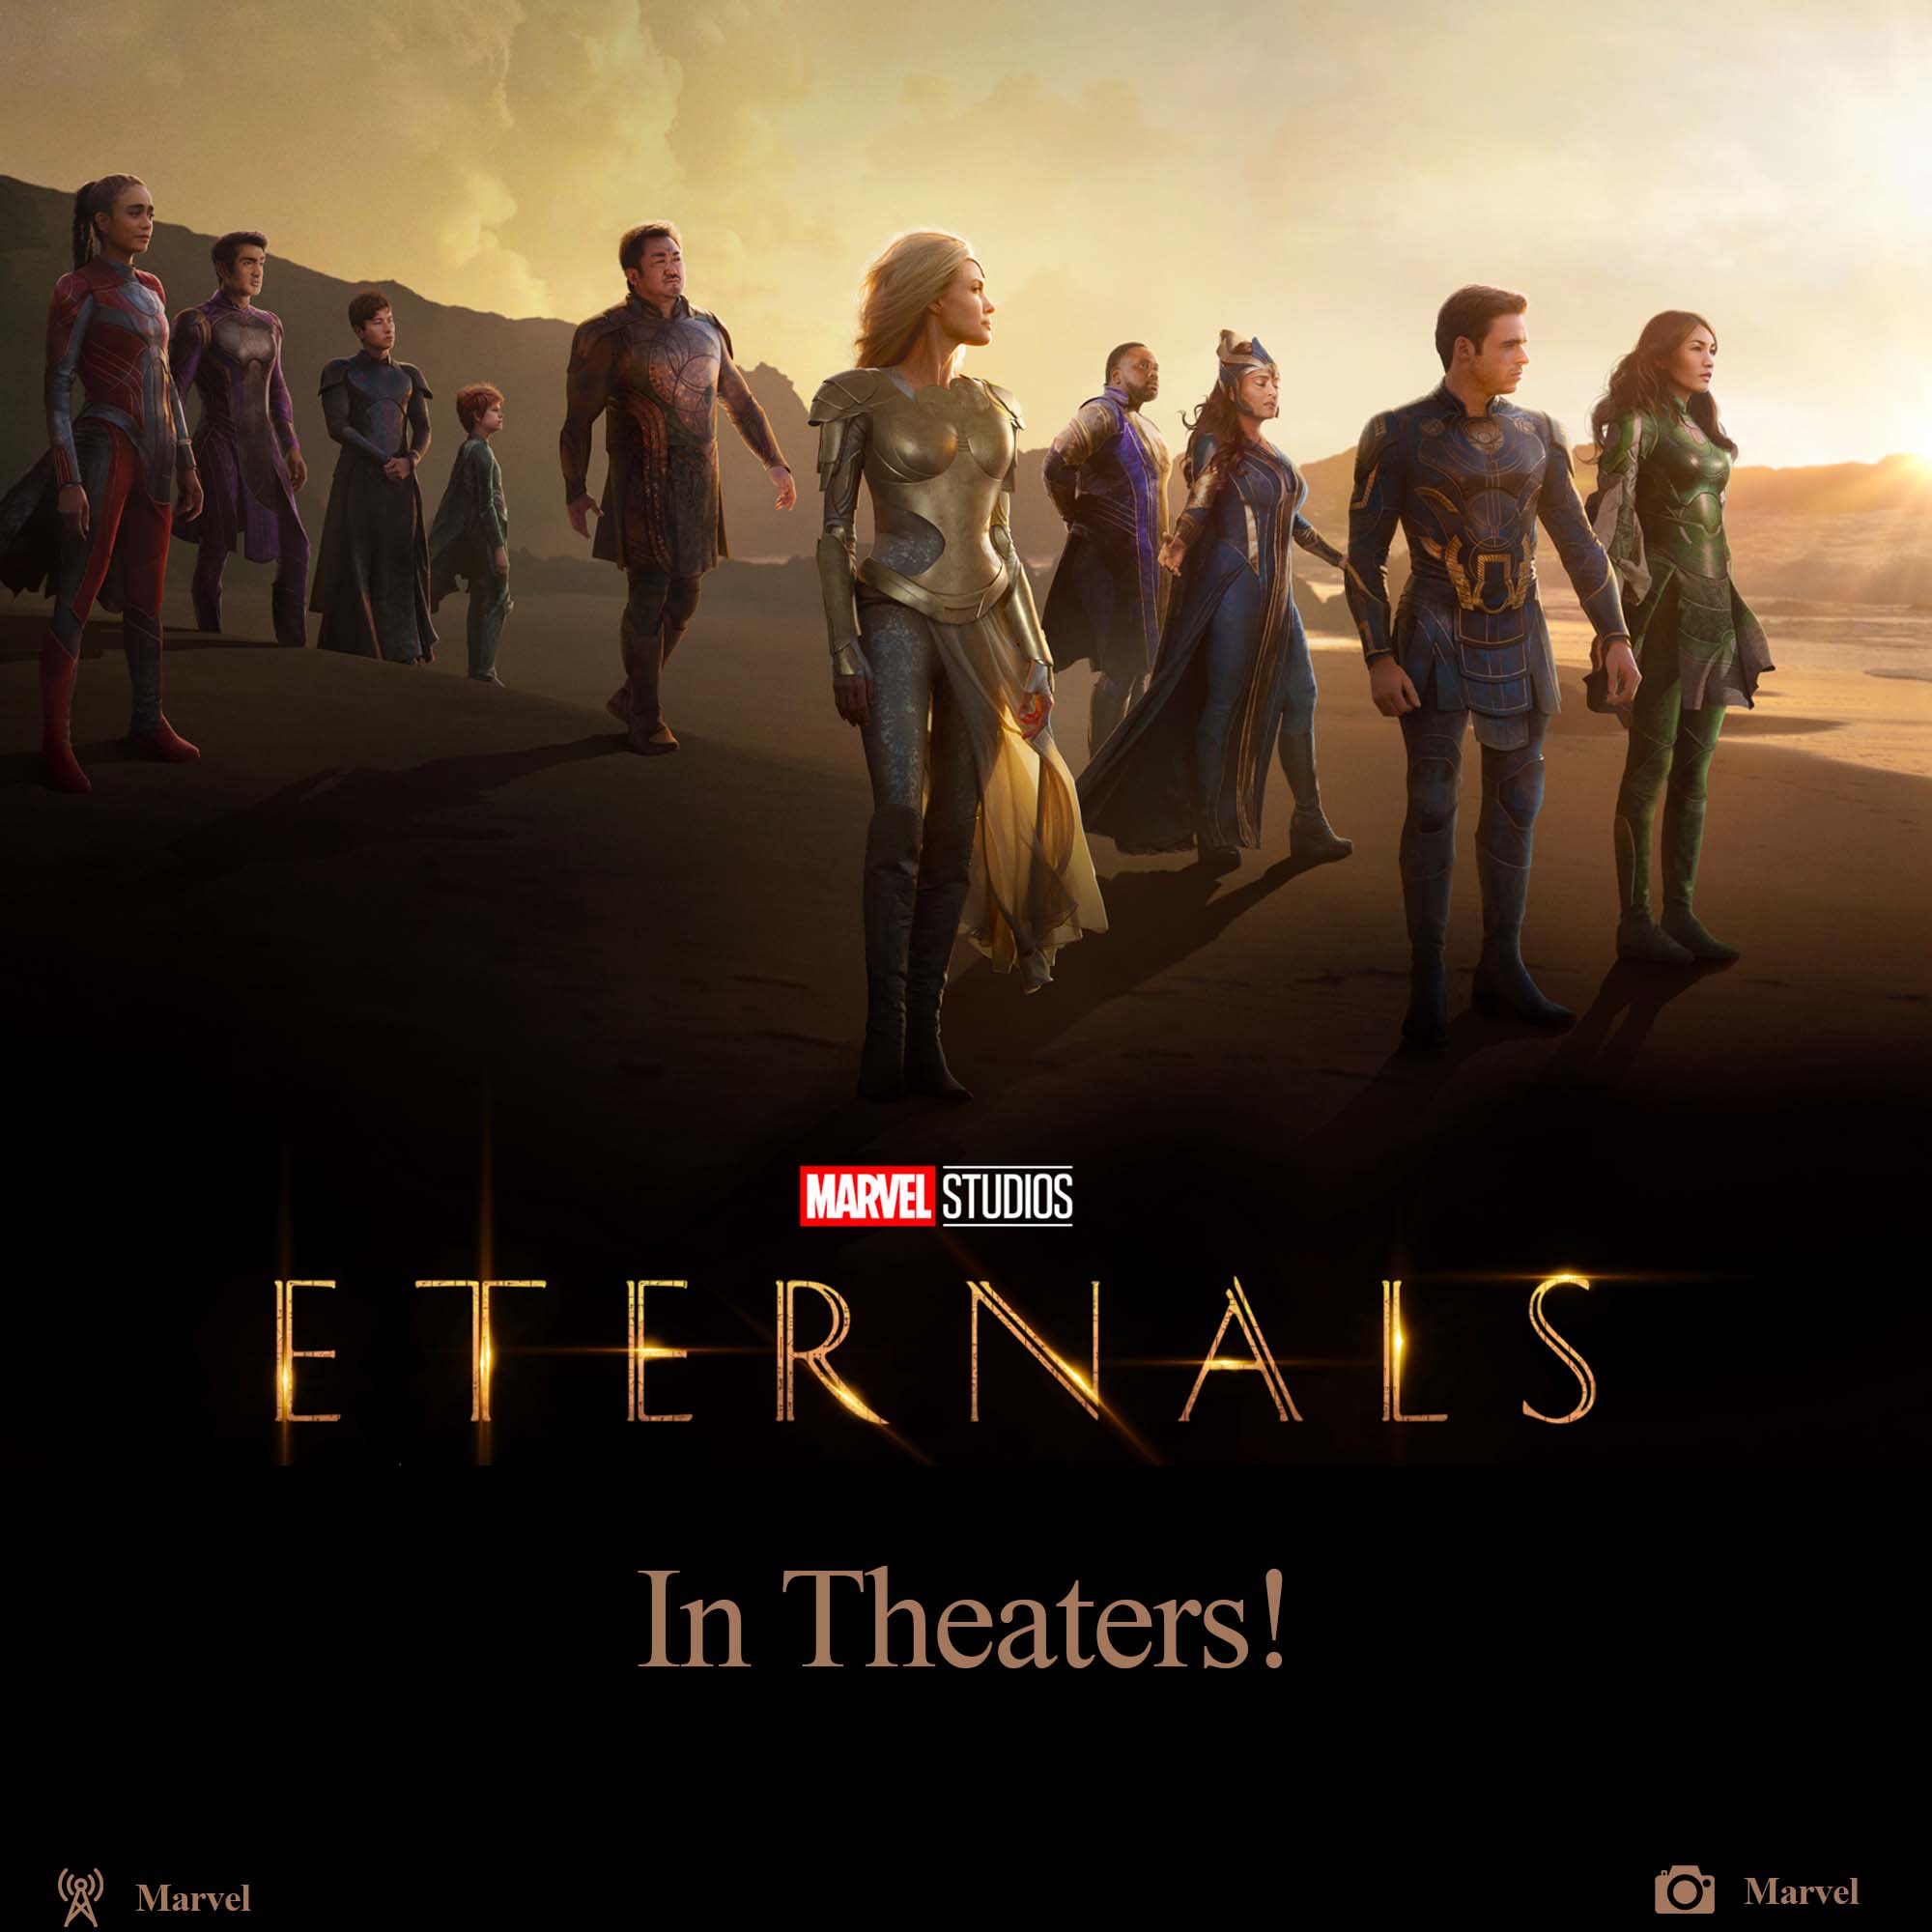 Marvel Ethernals premieres in theaters